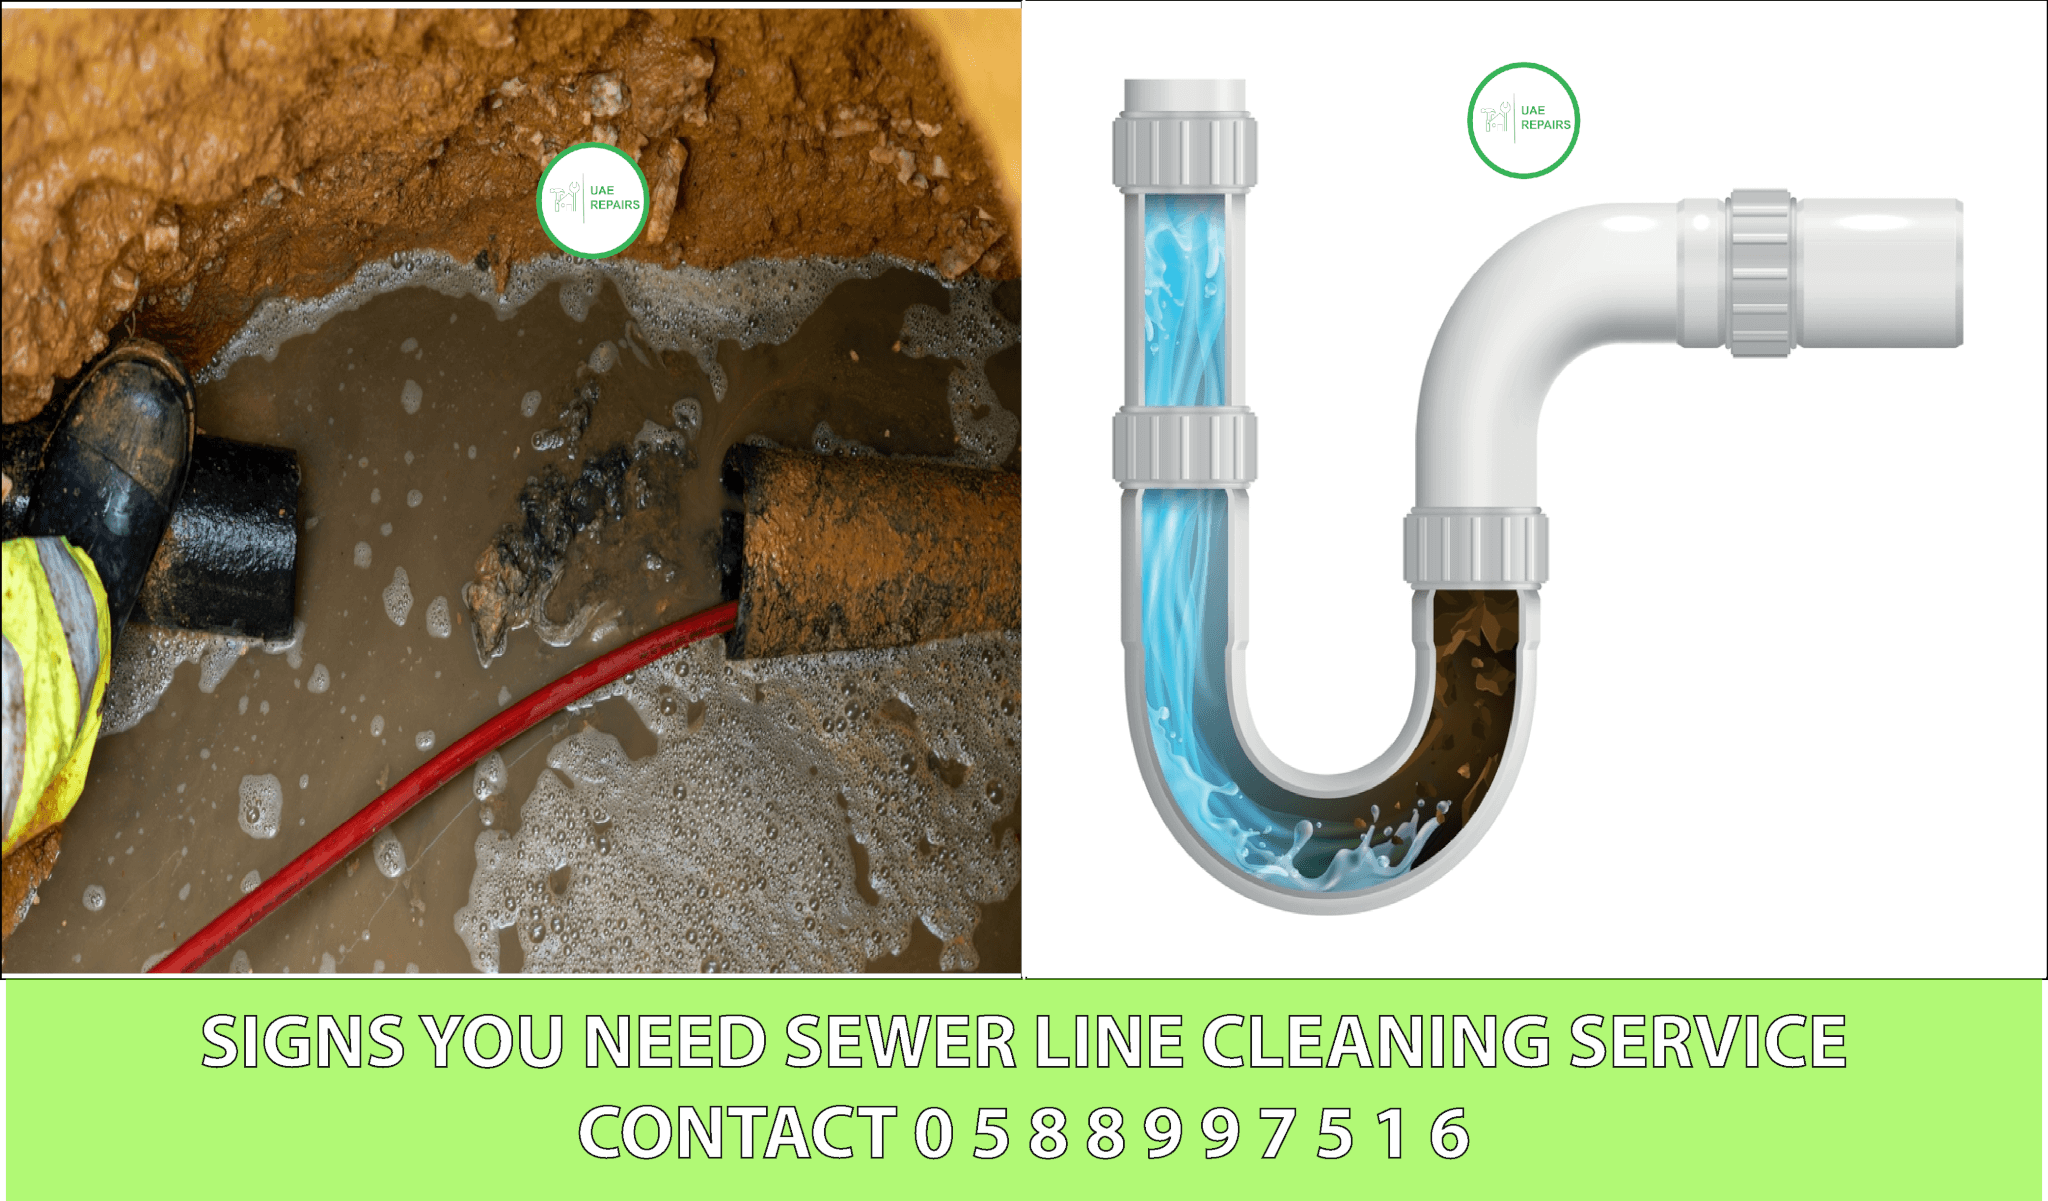 UAE REPAIRS Signs You Need Sewer Line Cleaning